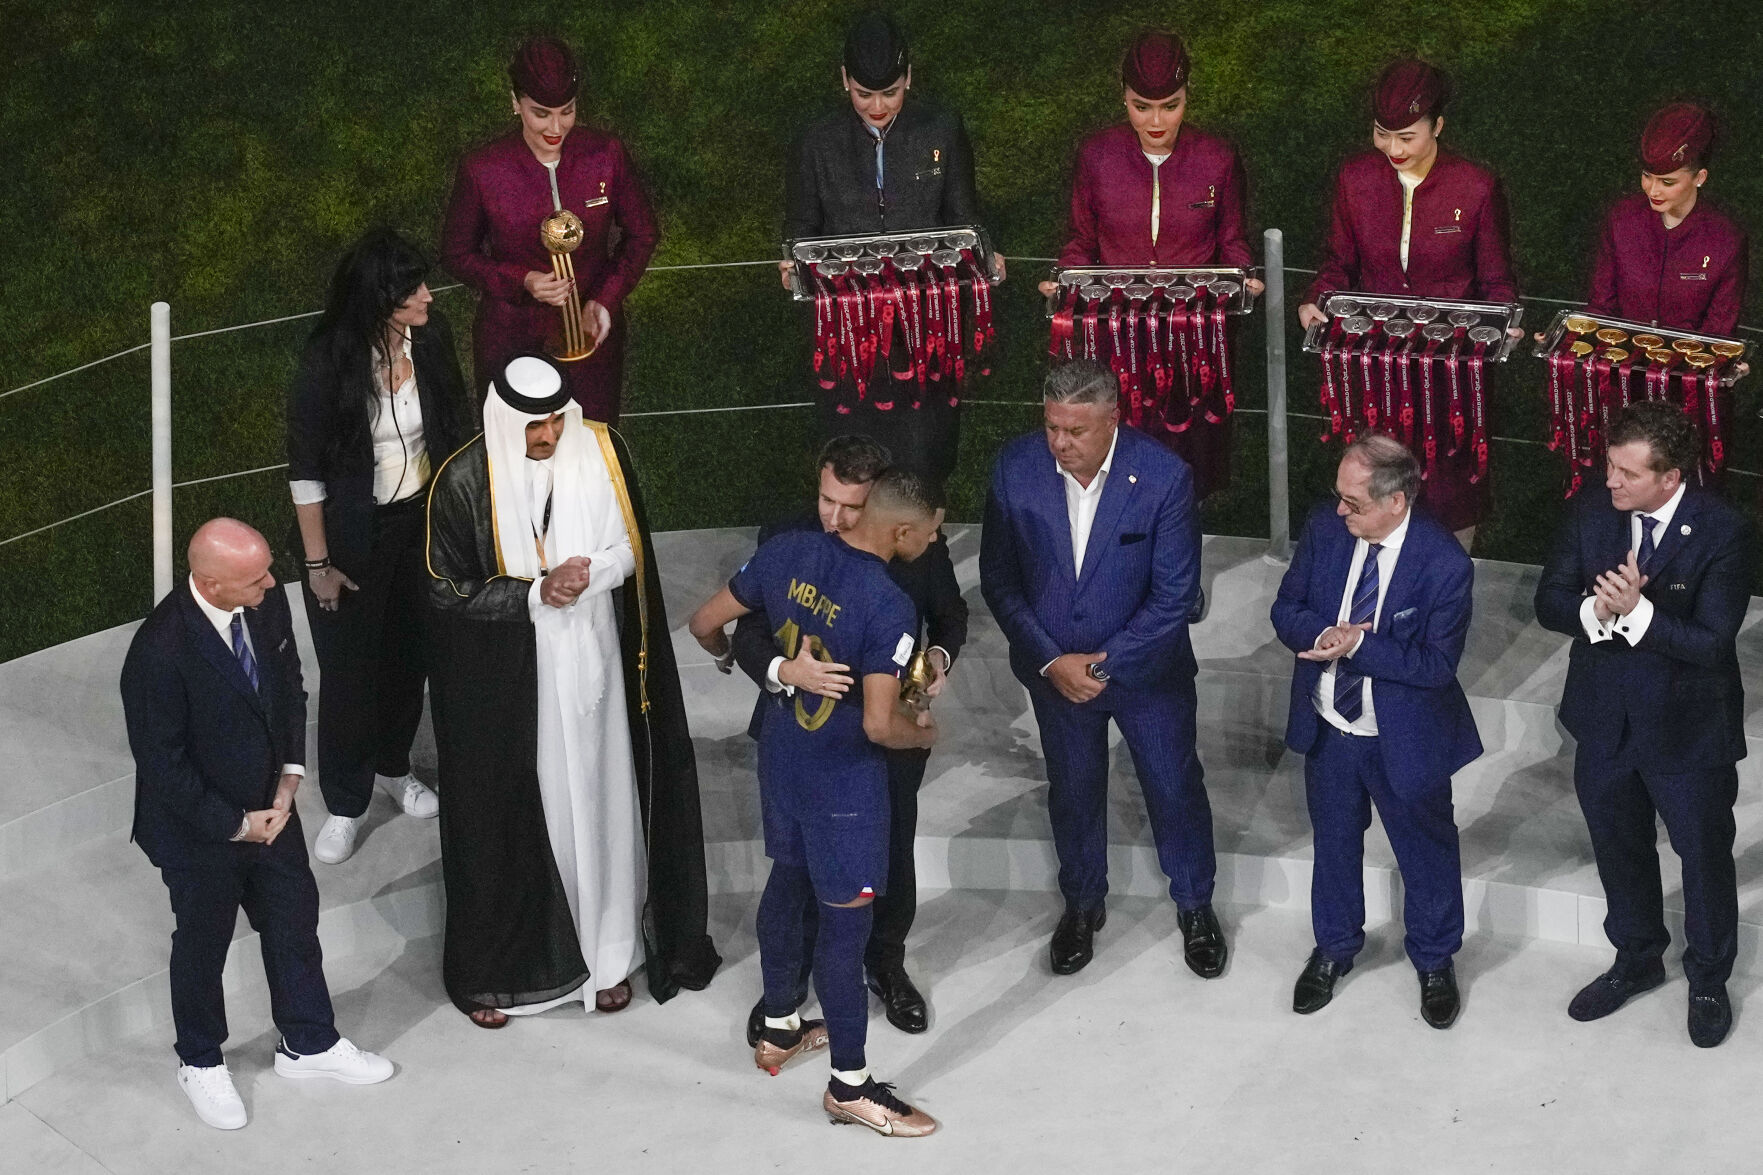 FILE - Qatar Airways staff in uniform, in background, assist in the medal ceremony, as French President Emmanuel Macron hugs France